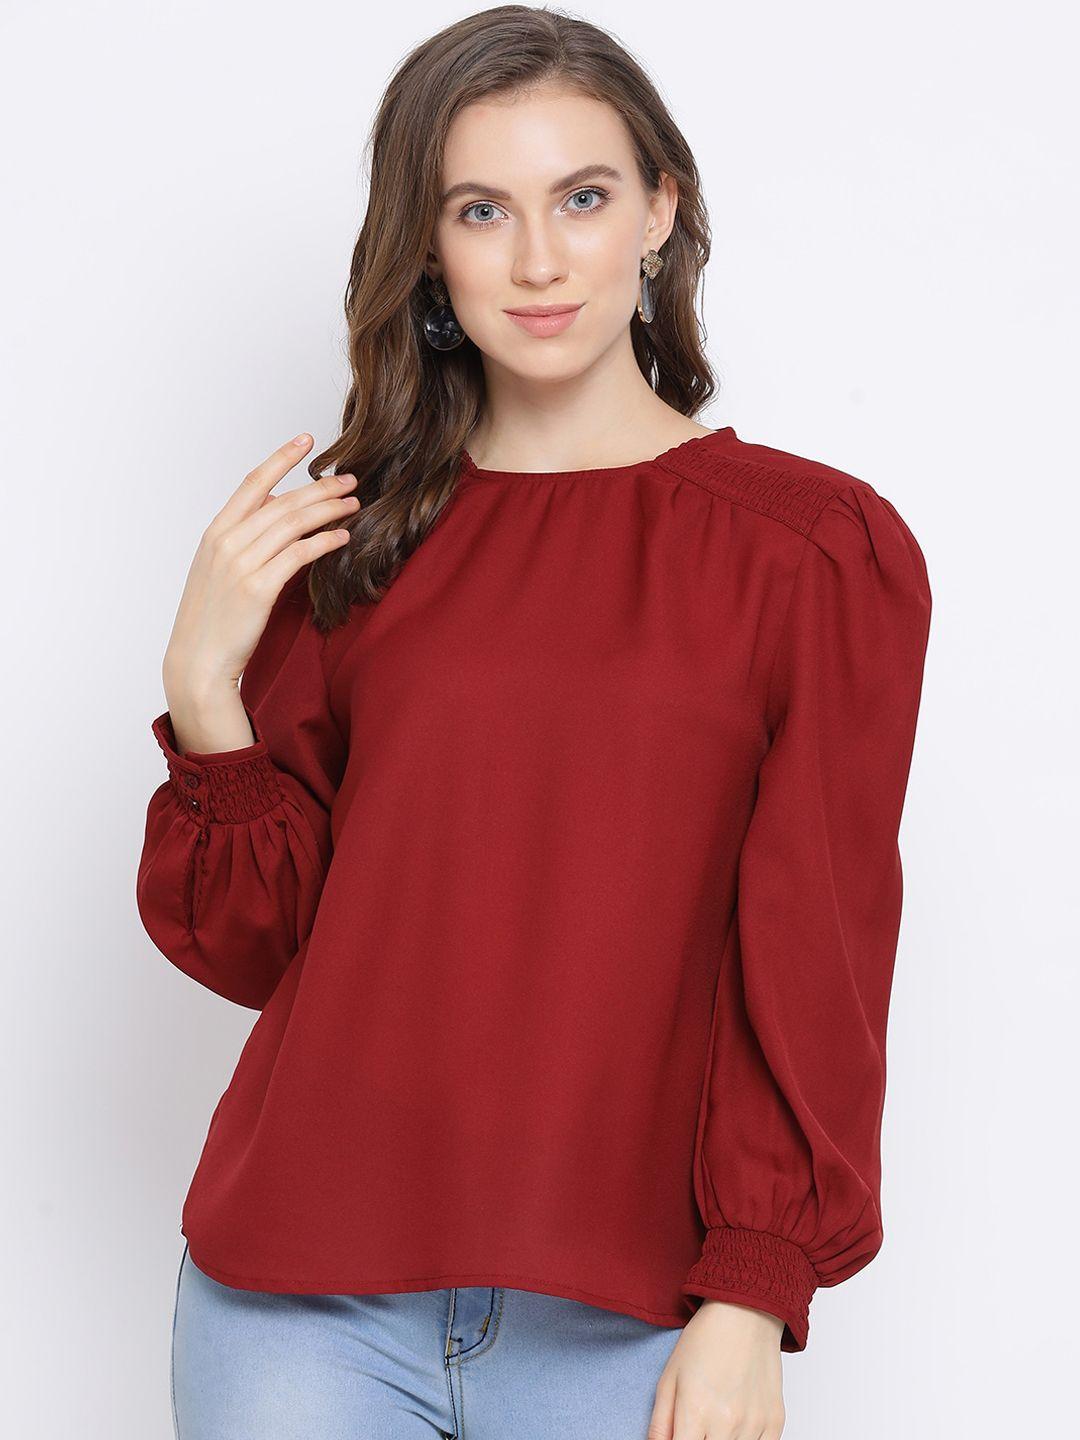 oxolloxo women red solid top